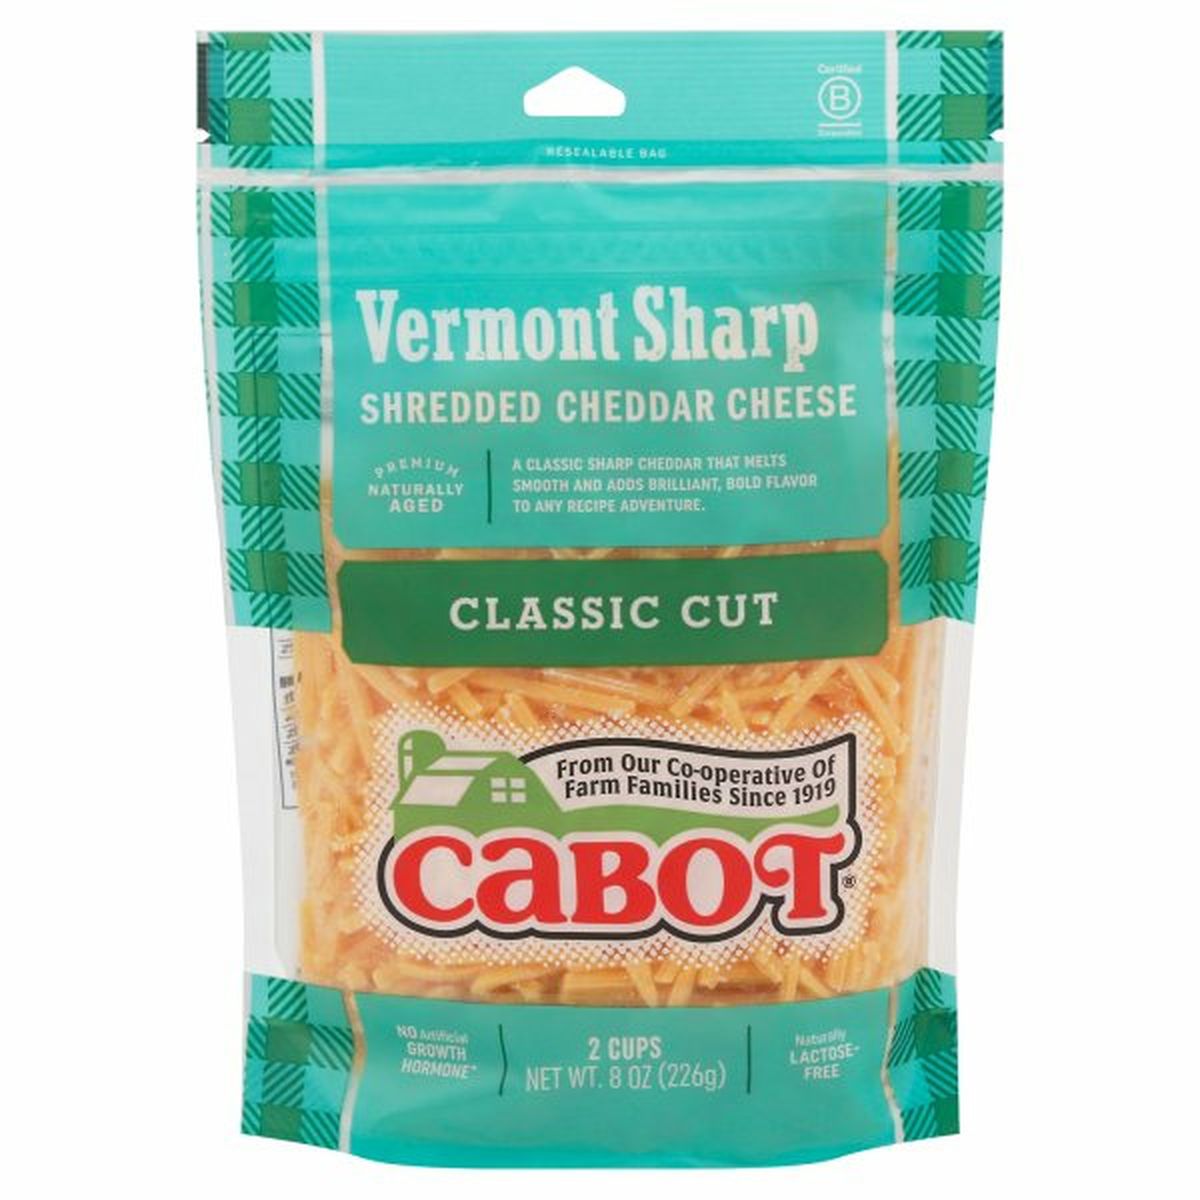 Calories in Cabot Shredded Cheese, Cheddar, Vermont Sharp, Classic Cut